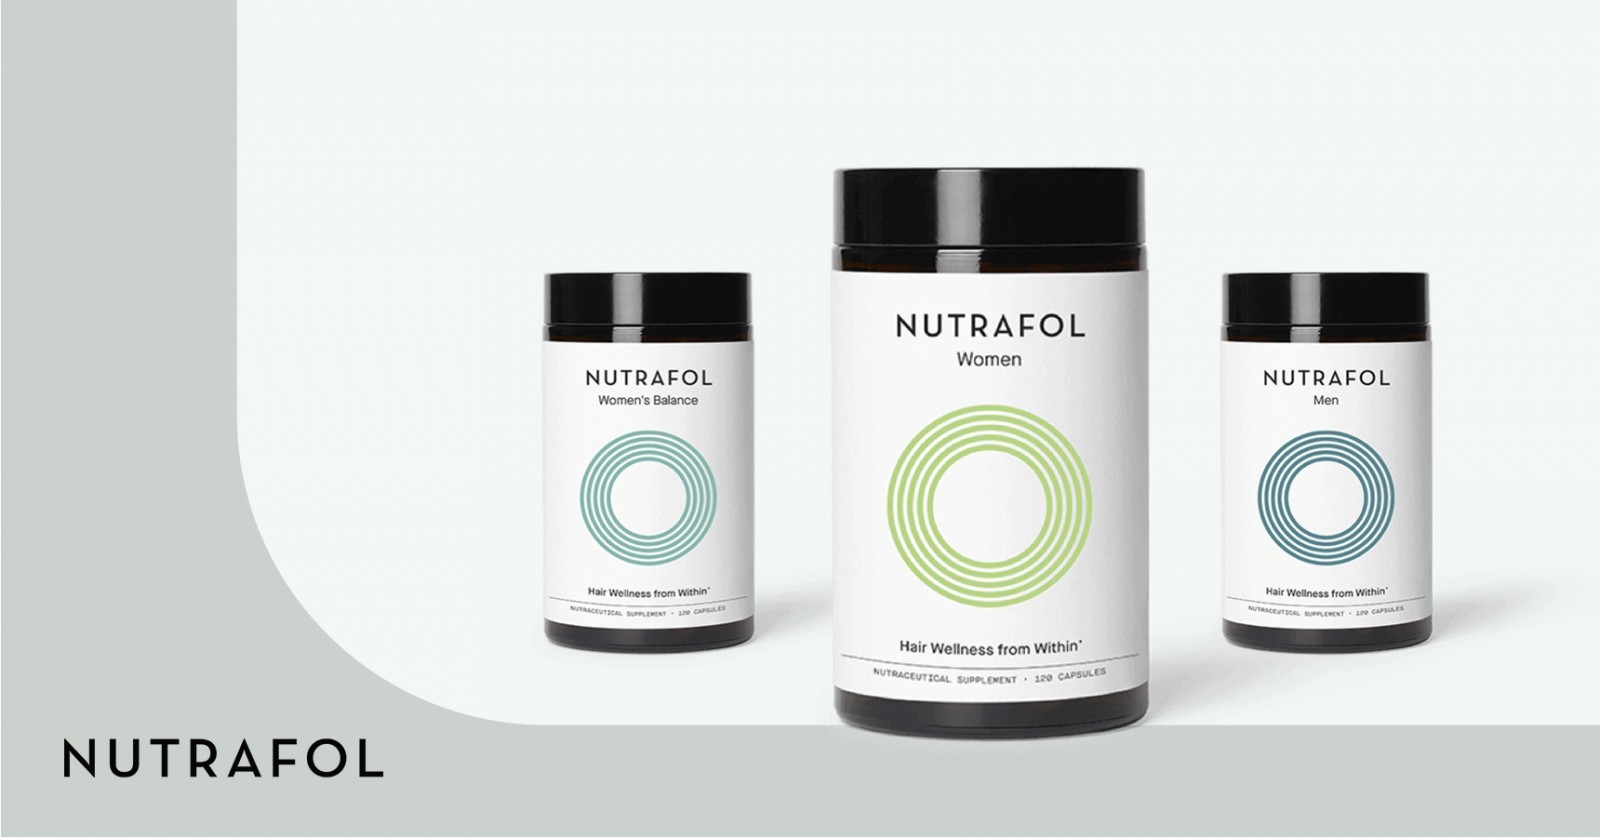 Nurtafol various supplements targeted for men and women are clinically tested and physician-formulated for visibly thicker, stronger hair.